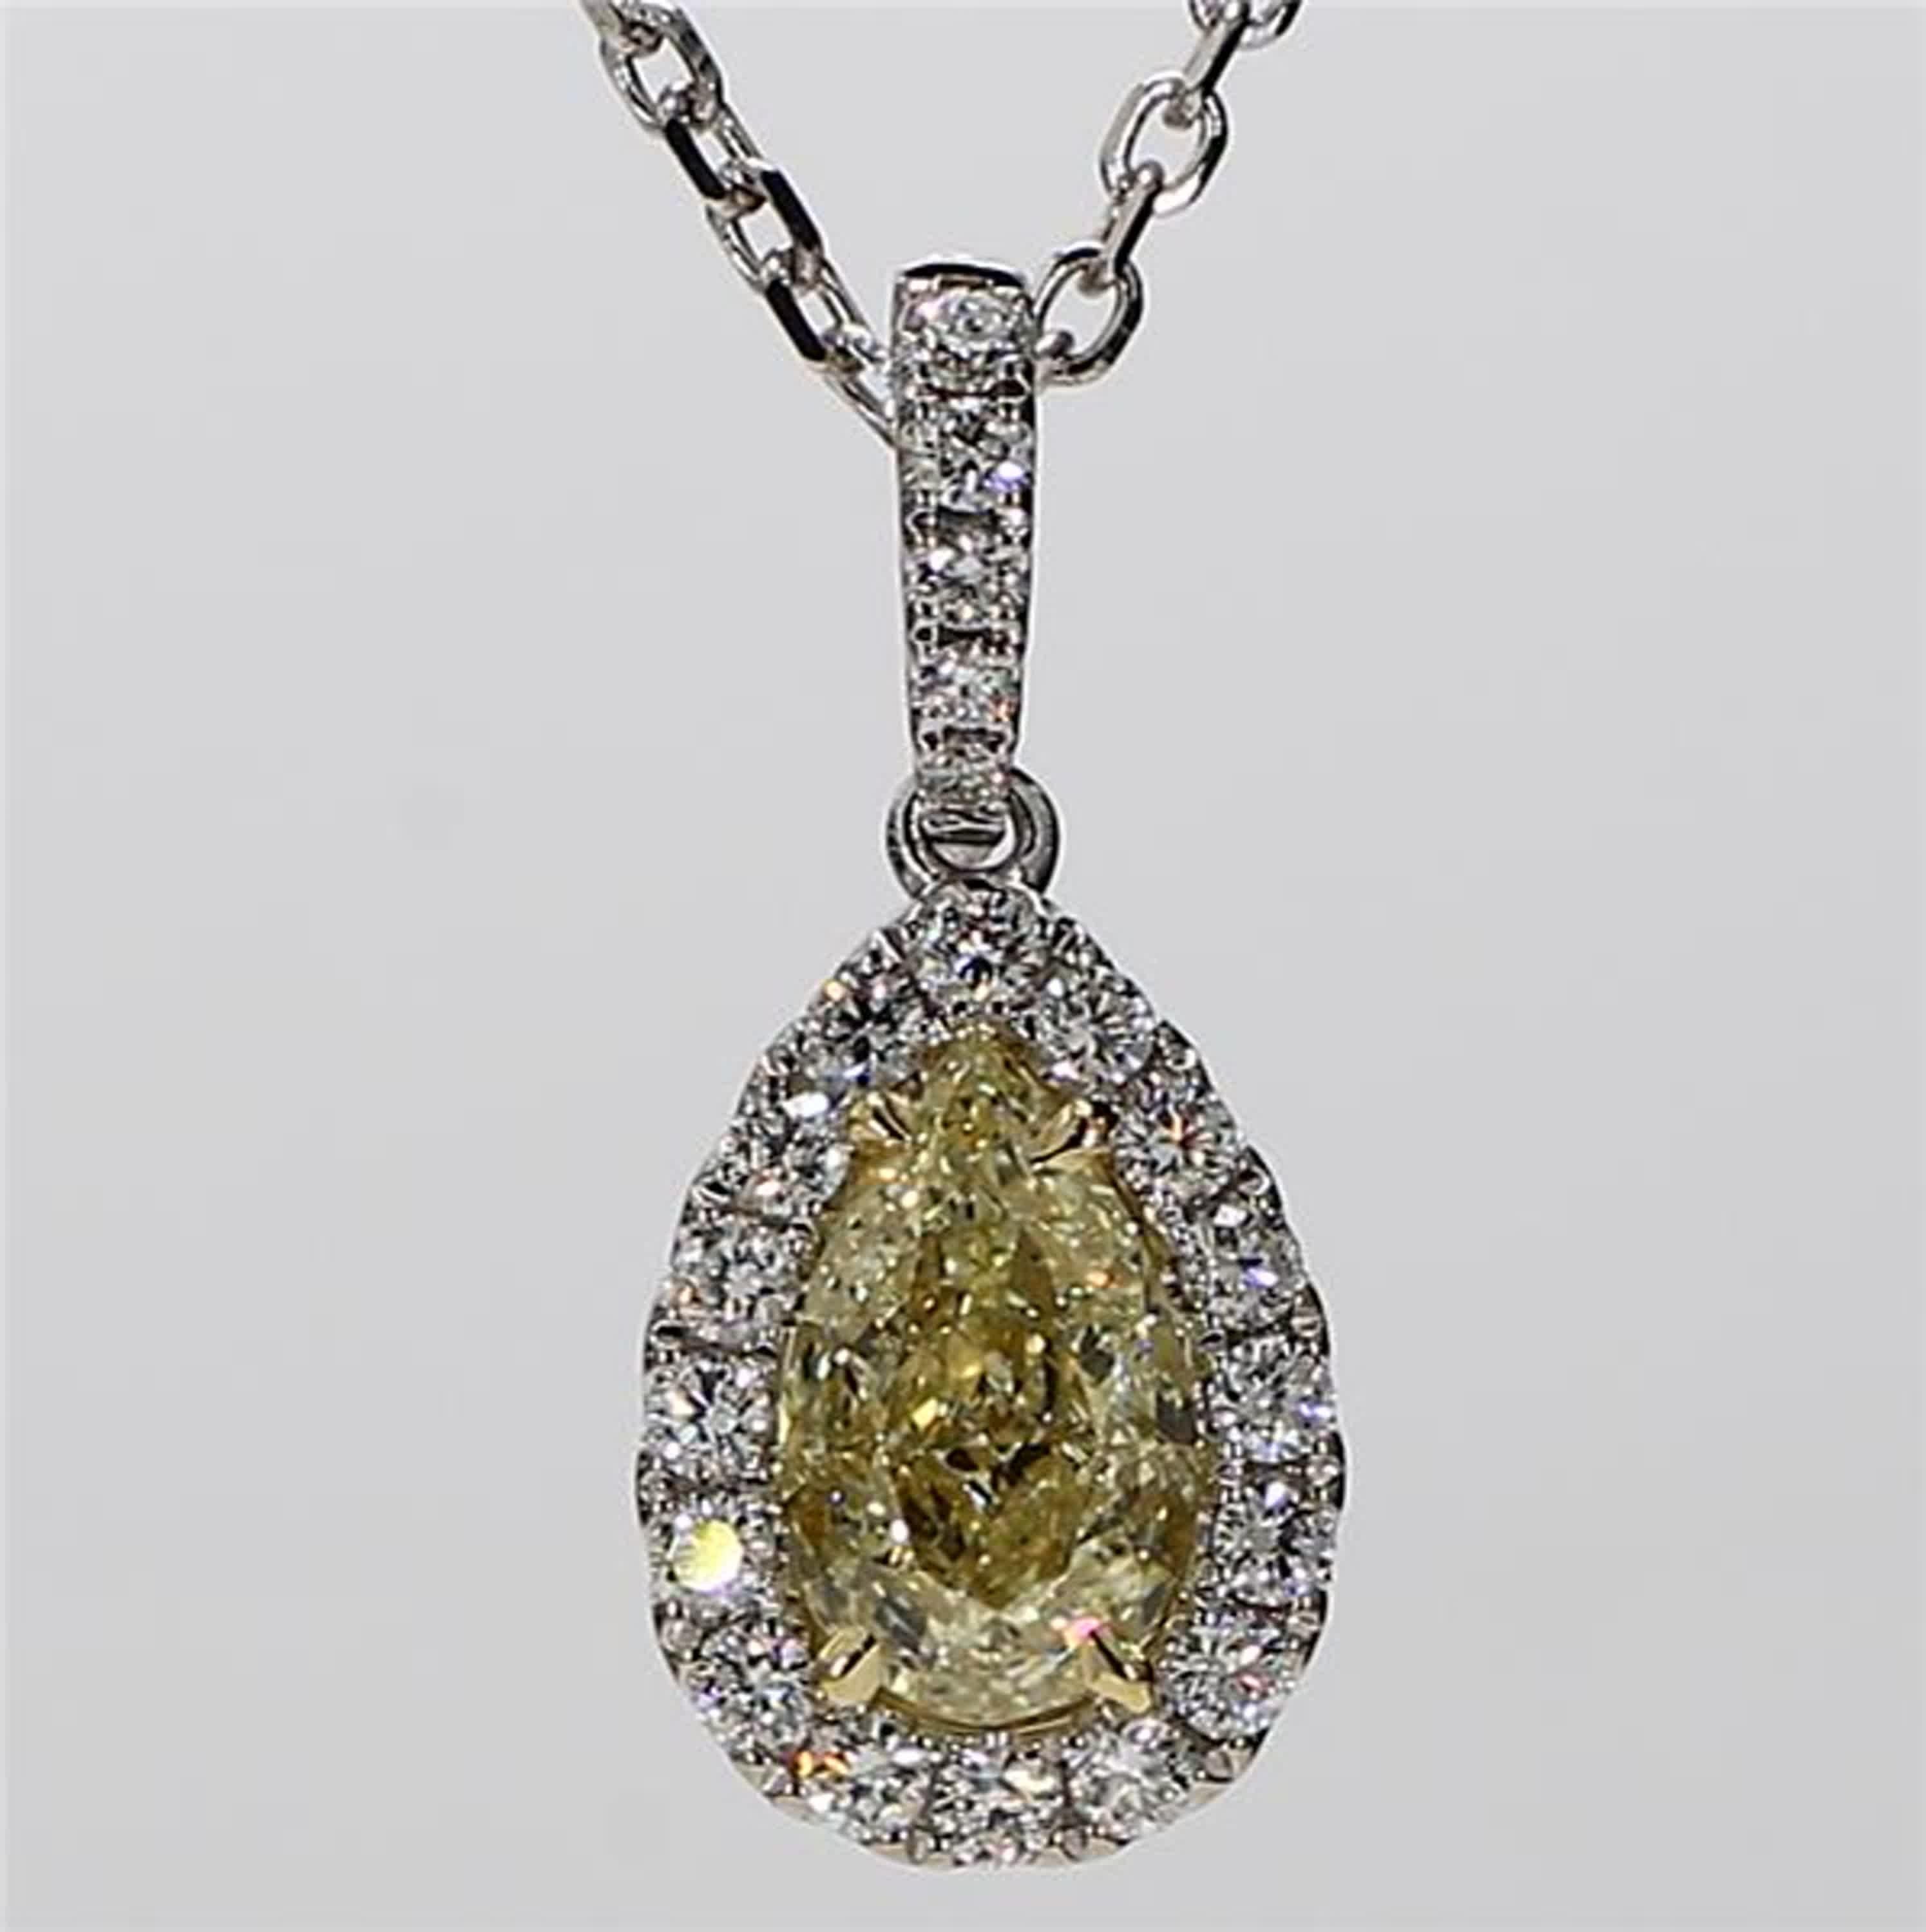 RareGemWorld's classic diamond pendant. Mounted in a beautiful 18K Yellow and White Gold setting with a natural pear cut yellow diamond. The yellow diamond is surrounded by round natural white diamond melee. This pendant is guaranteed to impress and